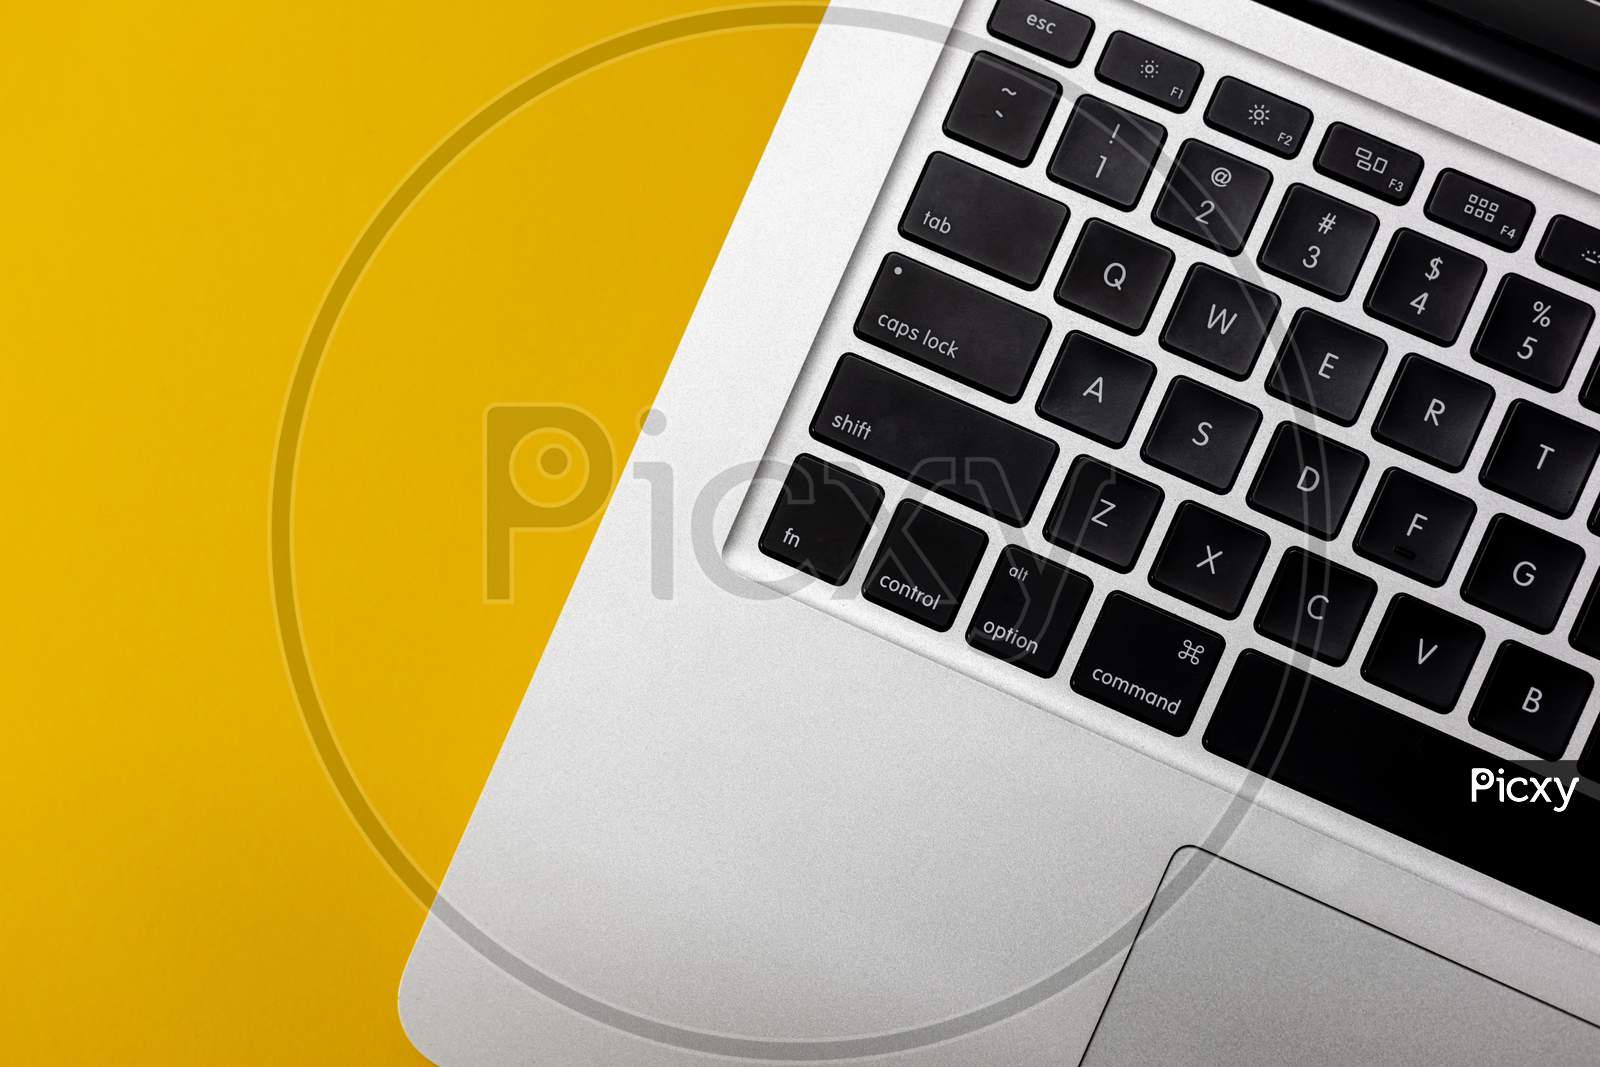 Flat lay, top view of Laptop computer keyboard on a bright yellow background. Closeup macro aesthetic profile shot of keyboard. Work from home WFH workspace - angle 2